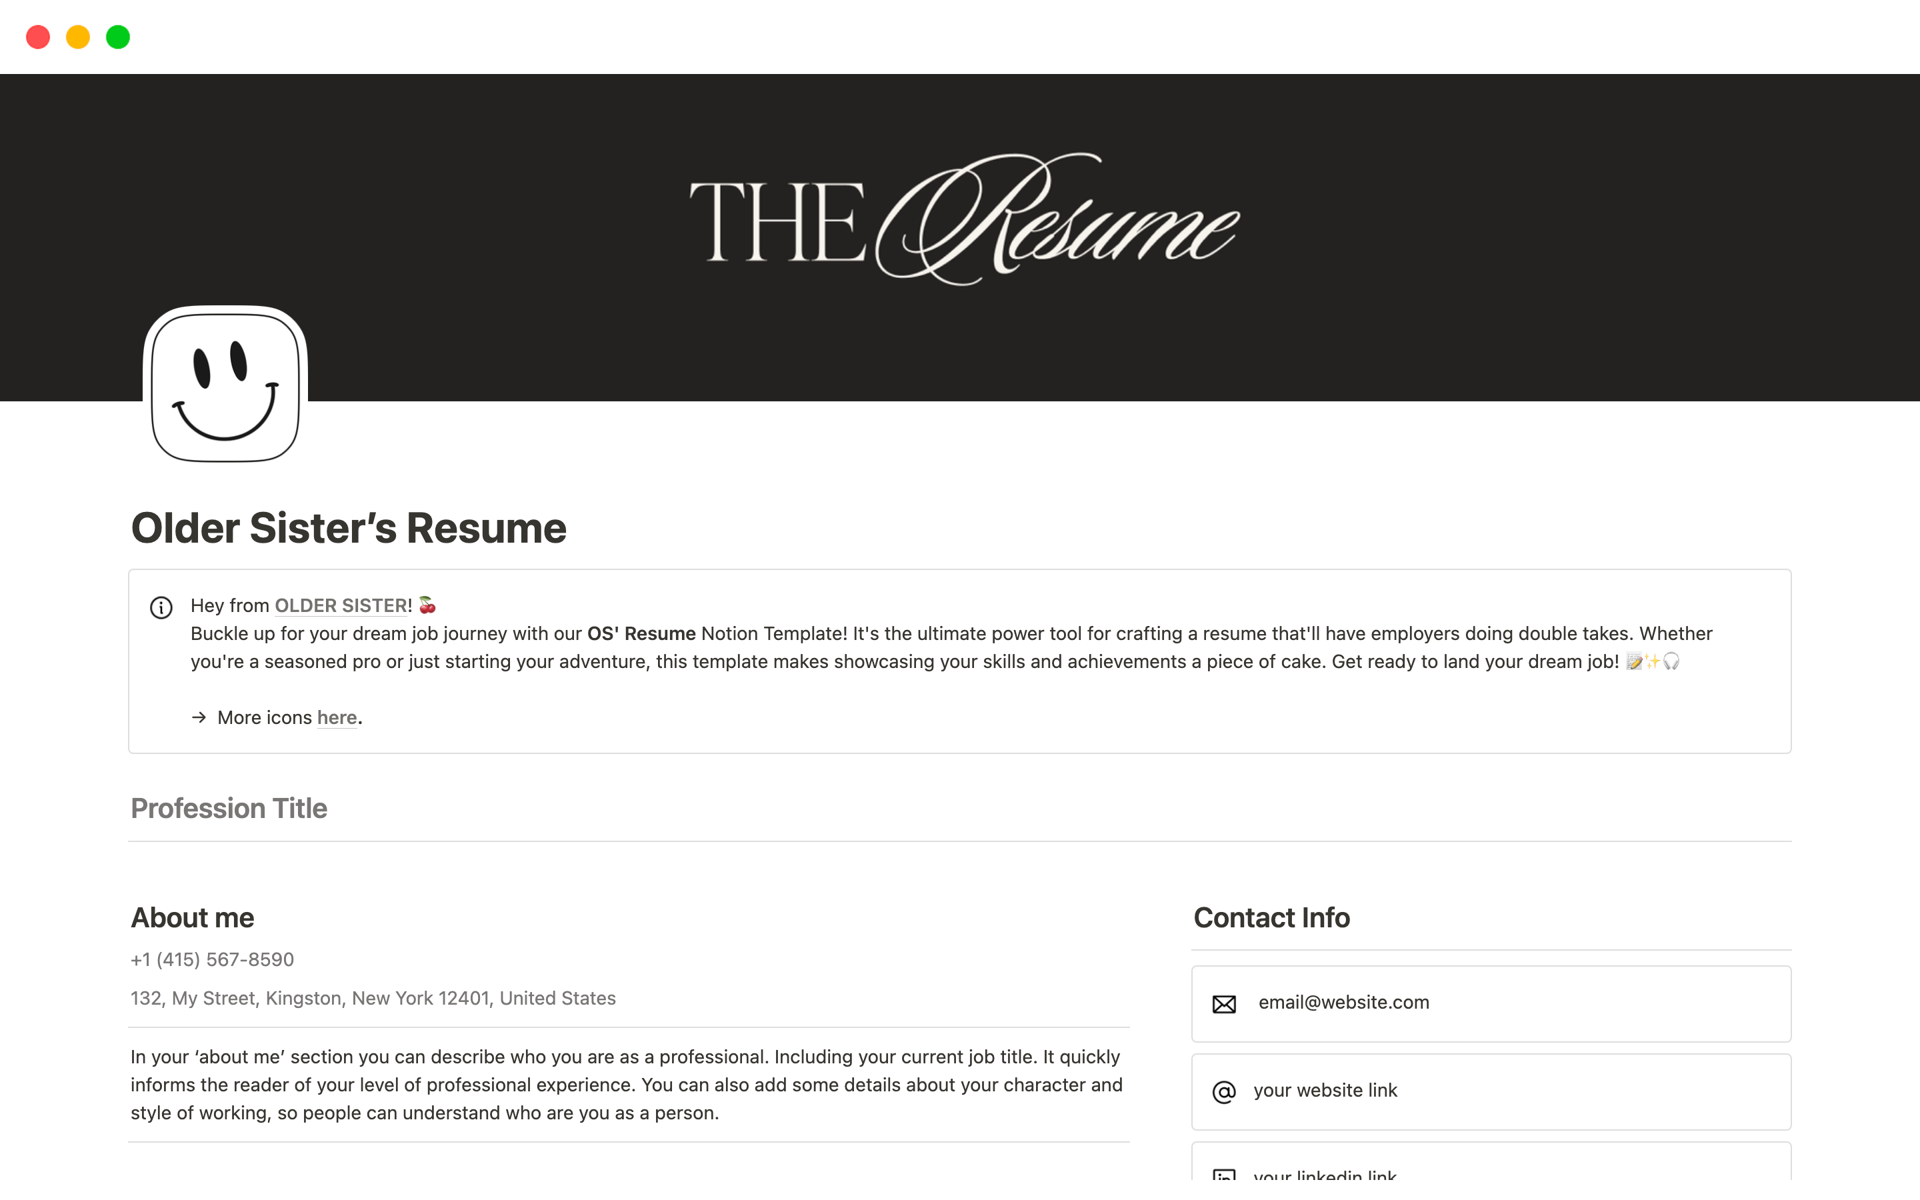 Buckle up for your dream job journey with our OS' Resume Notion Template! It's the ultimate power tool for crafting a resume that'll have employers doing double takes. Get ready to land your dream job! 📝✨🎧